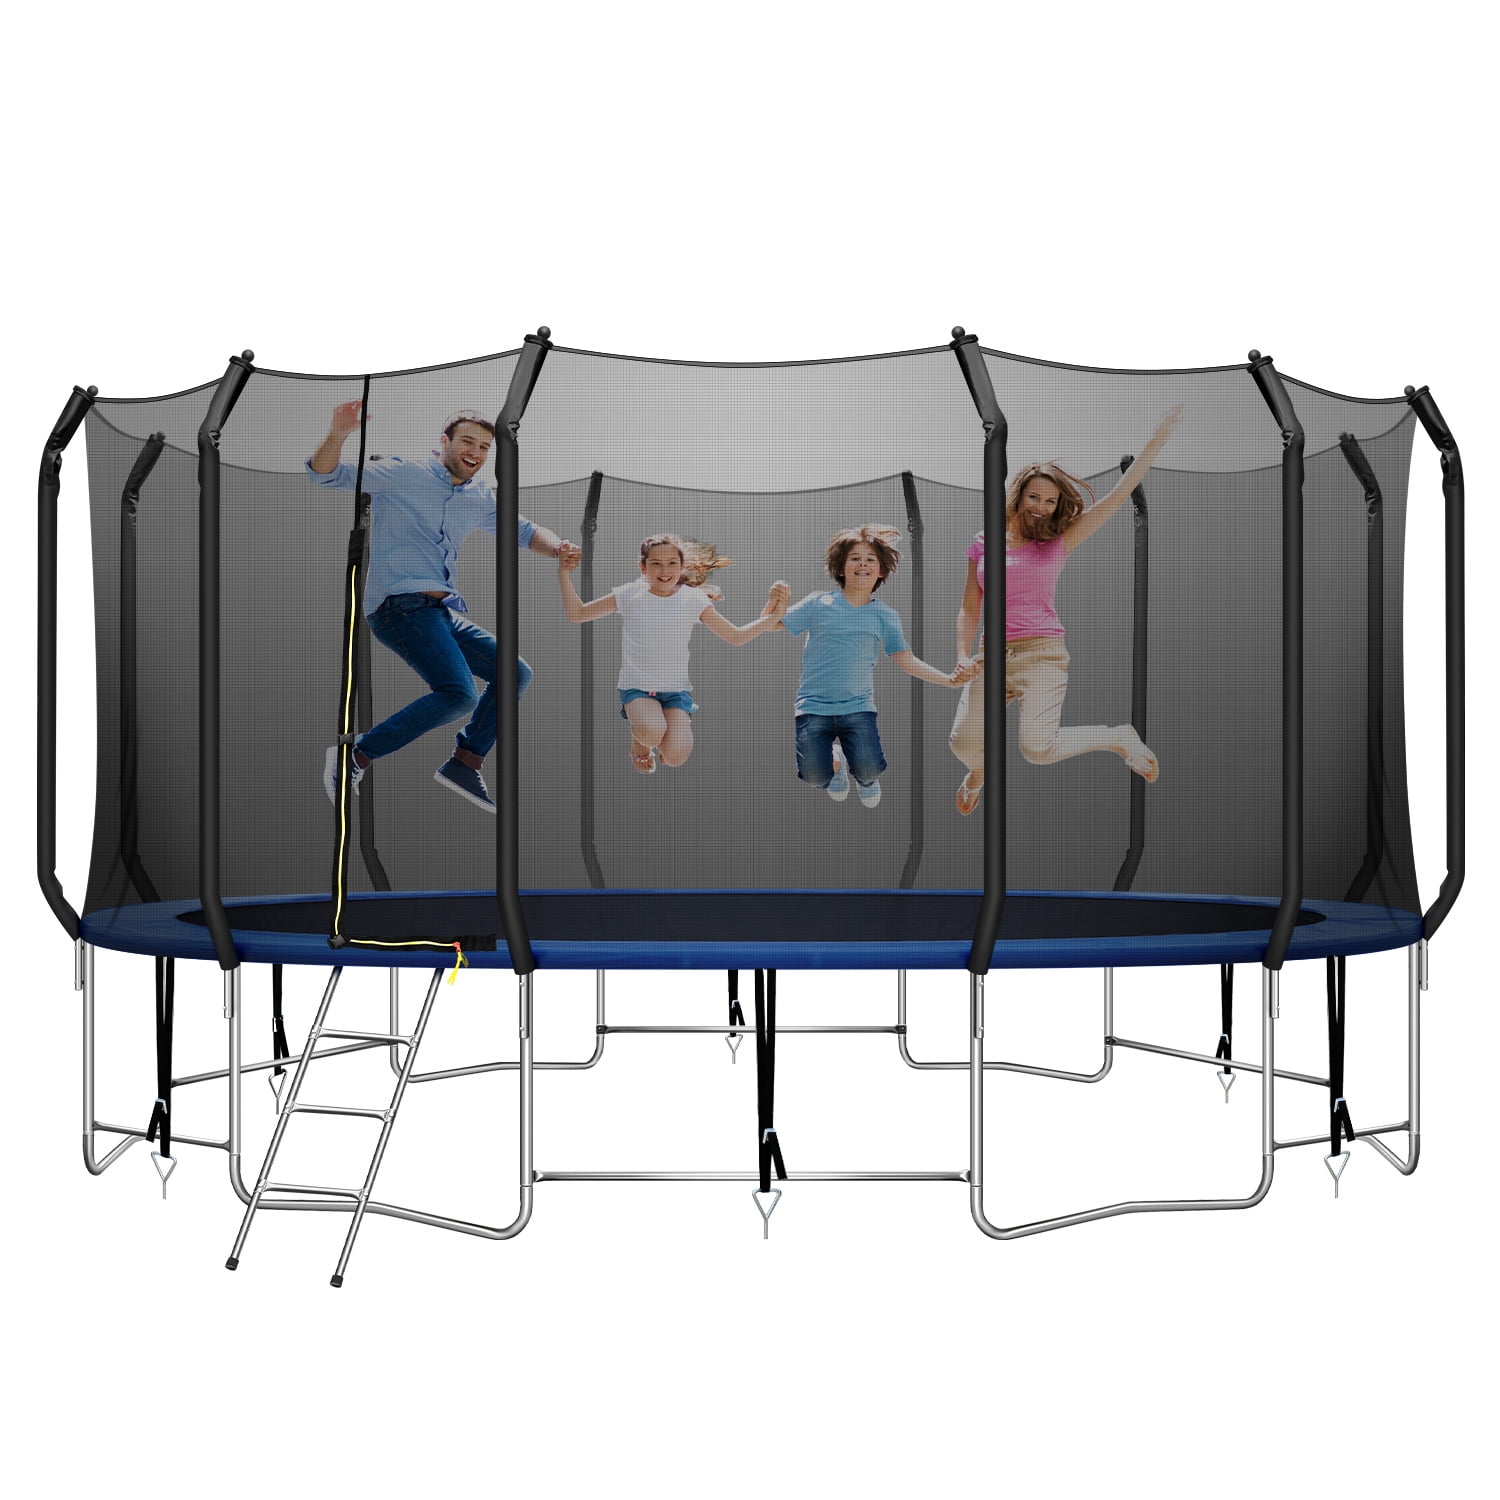 Outdoor 16FT Trampoline Bounce Jump Safety Enclosure Net W/Spring Pad Ladder 